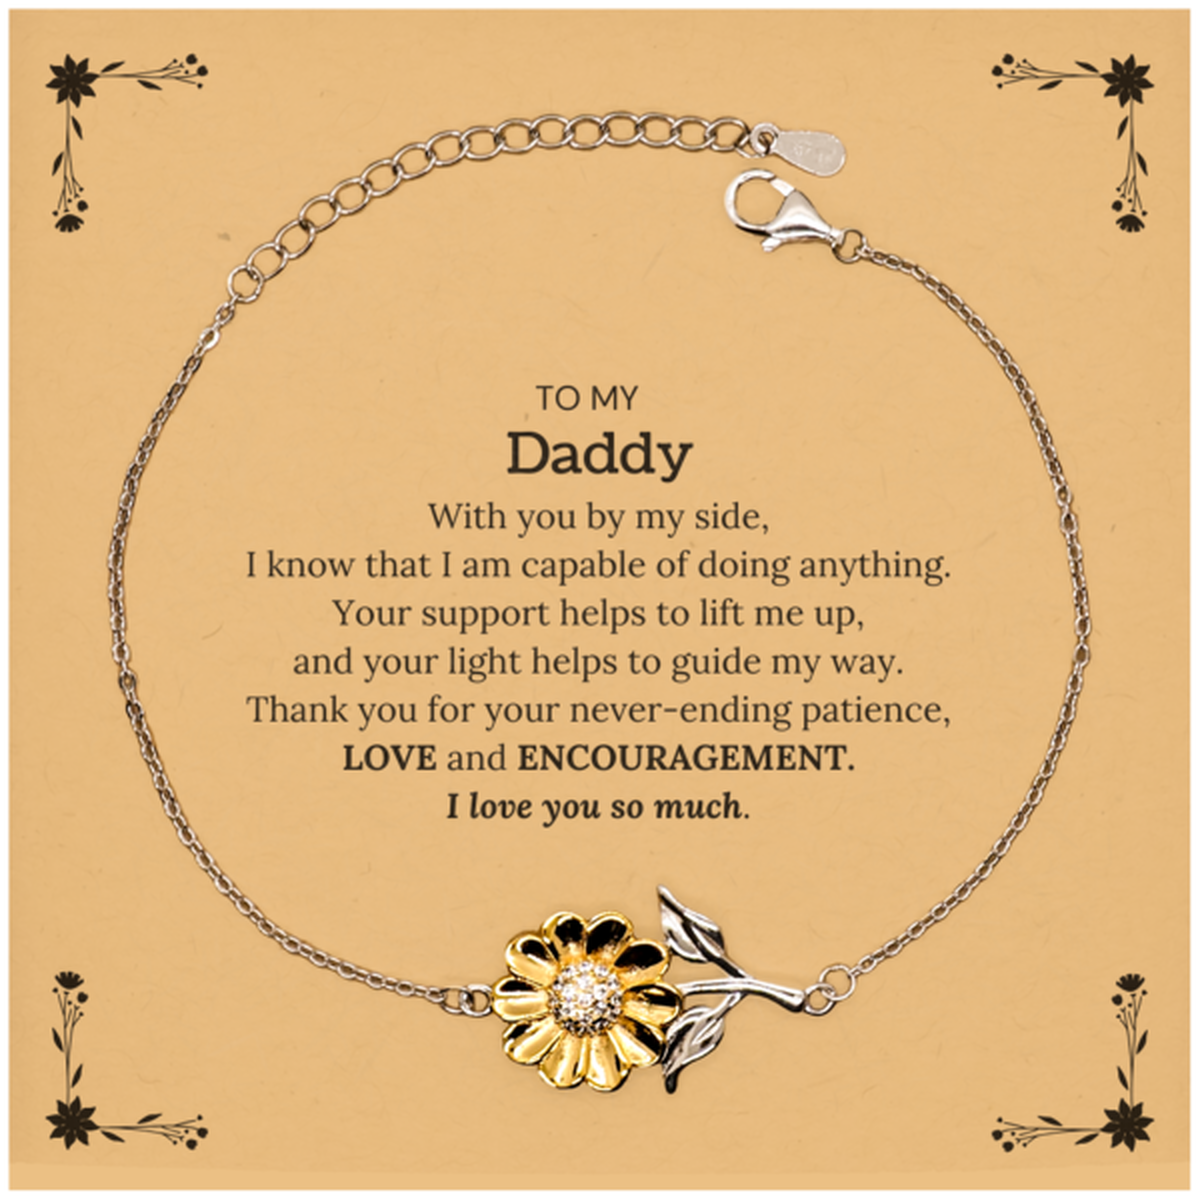 Appreciation Daddy Sunflower Bracelet Gifts, To My Daddy Birthday Christmas Wedding Keepsake Gifts for Daddy With you by my side, I know that I am capable of doing anything. I love you so much